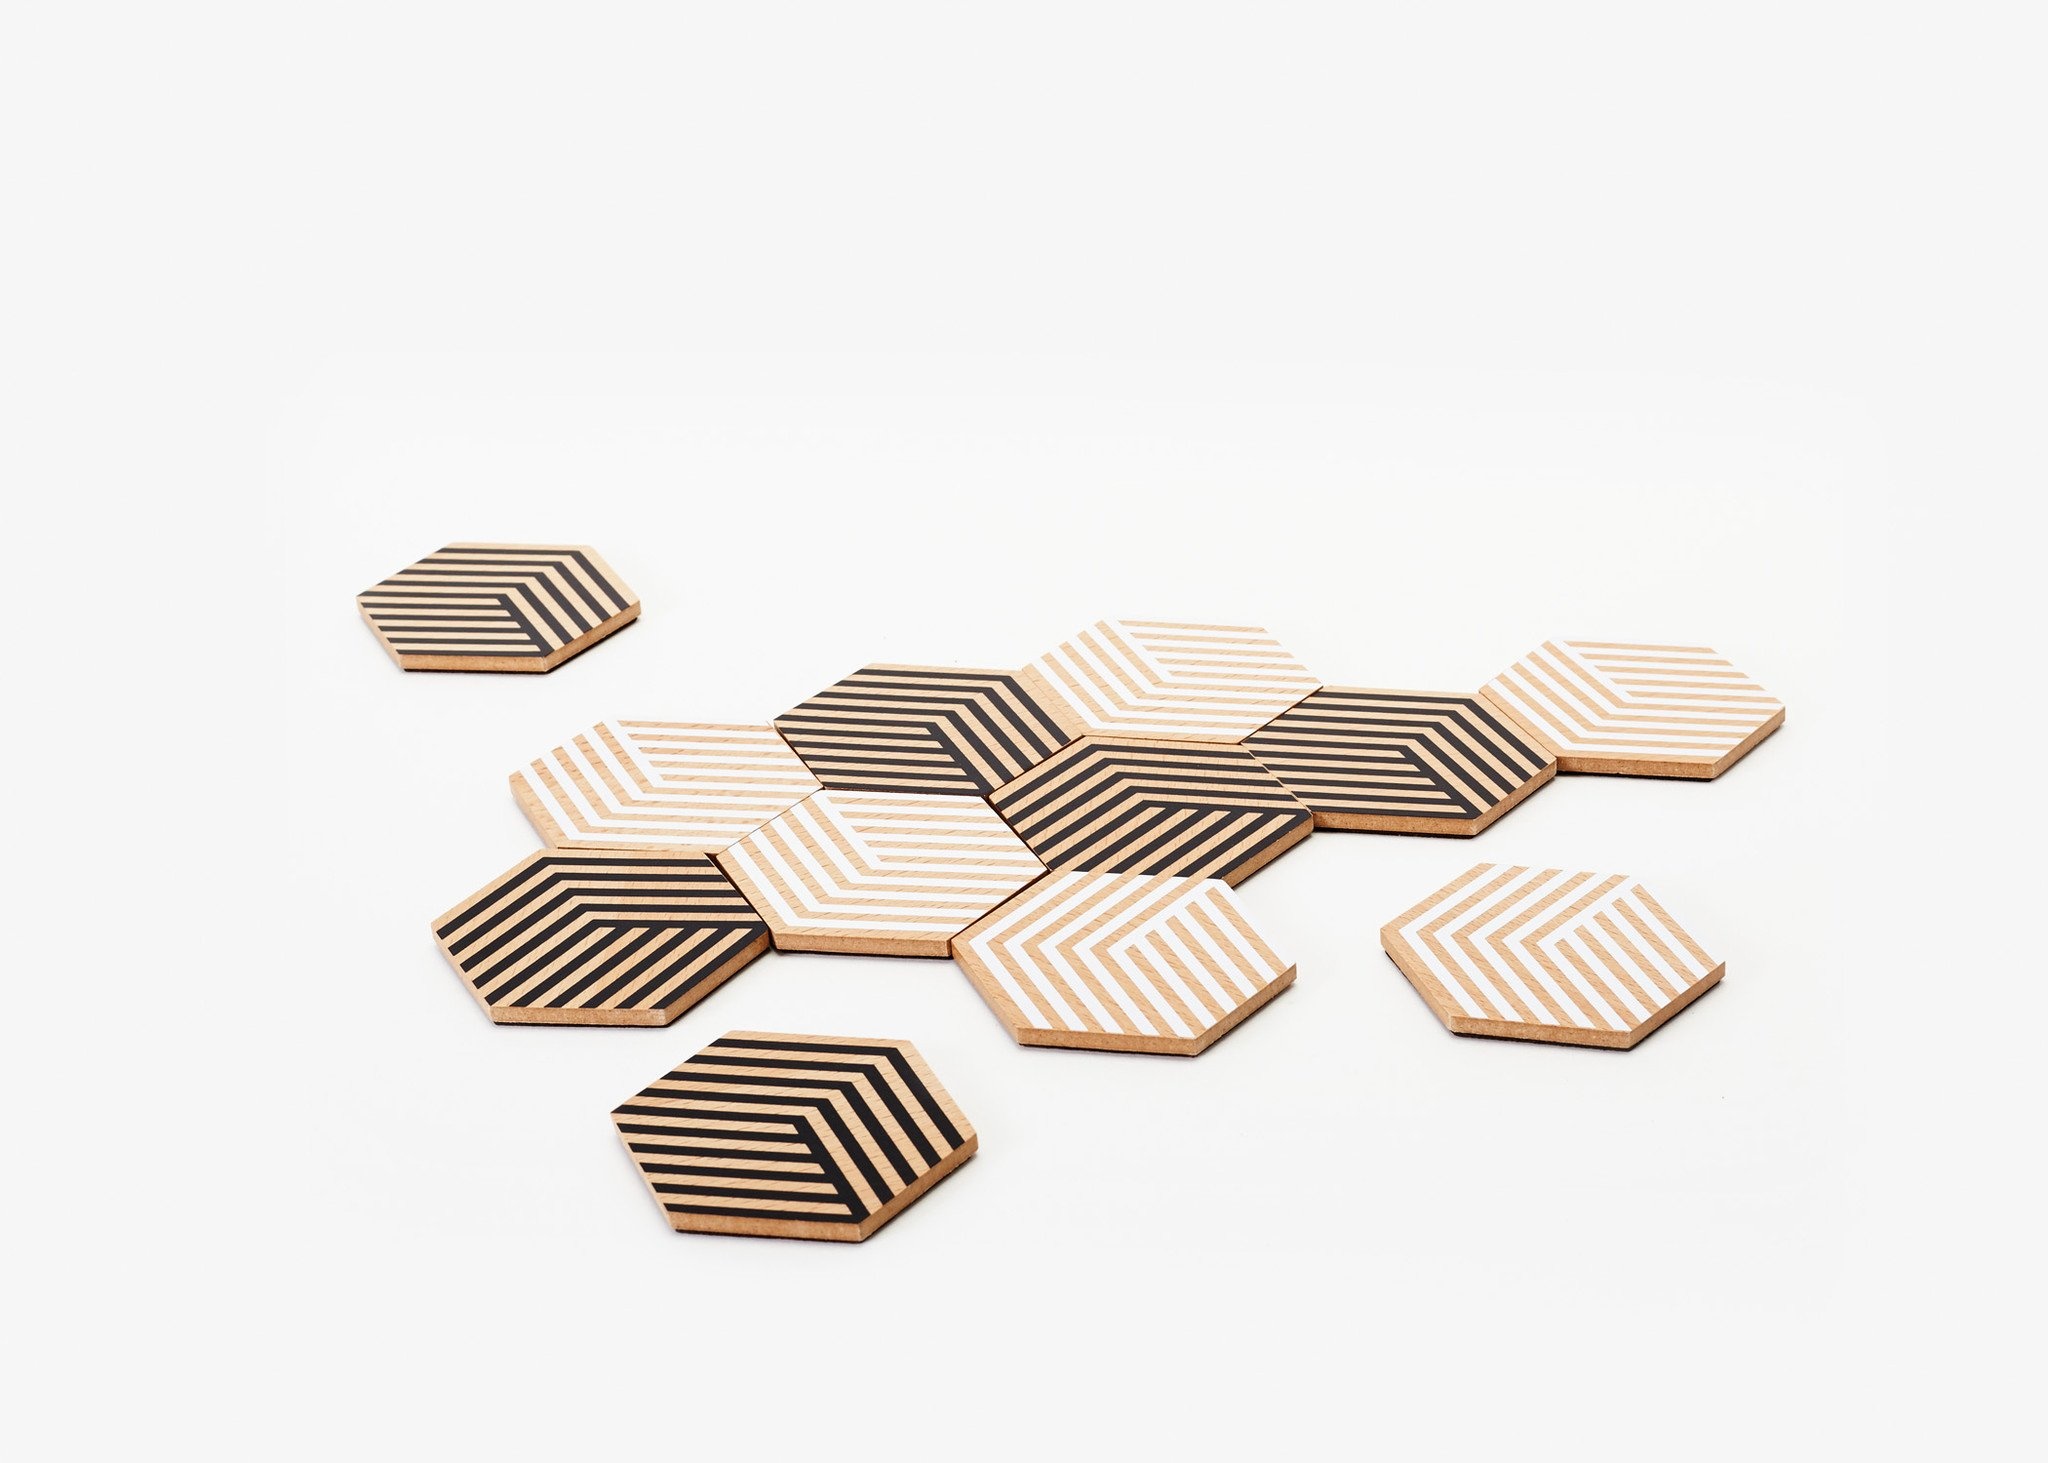 Hexagonal Acrylic Paperweight or Coaster with Cork Backing